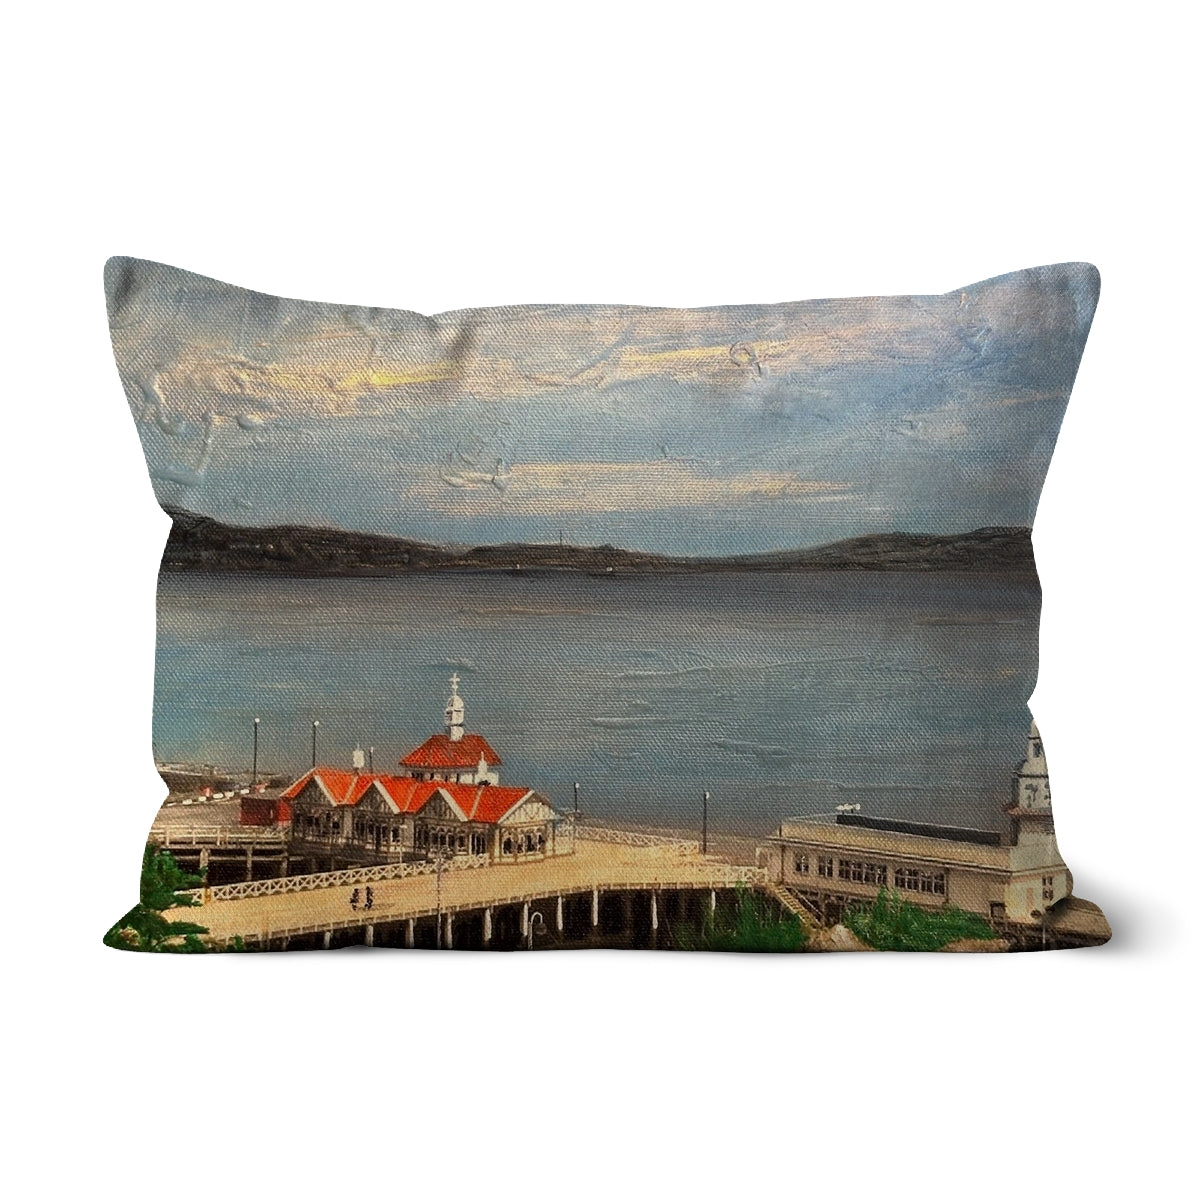 Looking From Dunoon Art Gifts Cushion-Cushions-River Clyde Art Gallery-Canvas-19"x13"-Paintings, Prints, Homeware, Art Gifts From Scotland By Scottish Artist Kevin Hunter